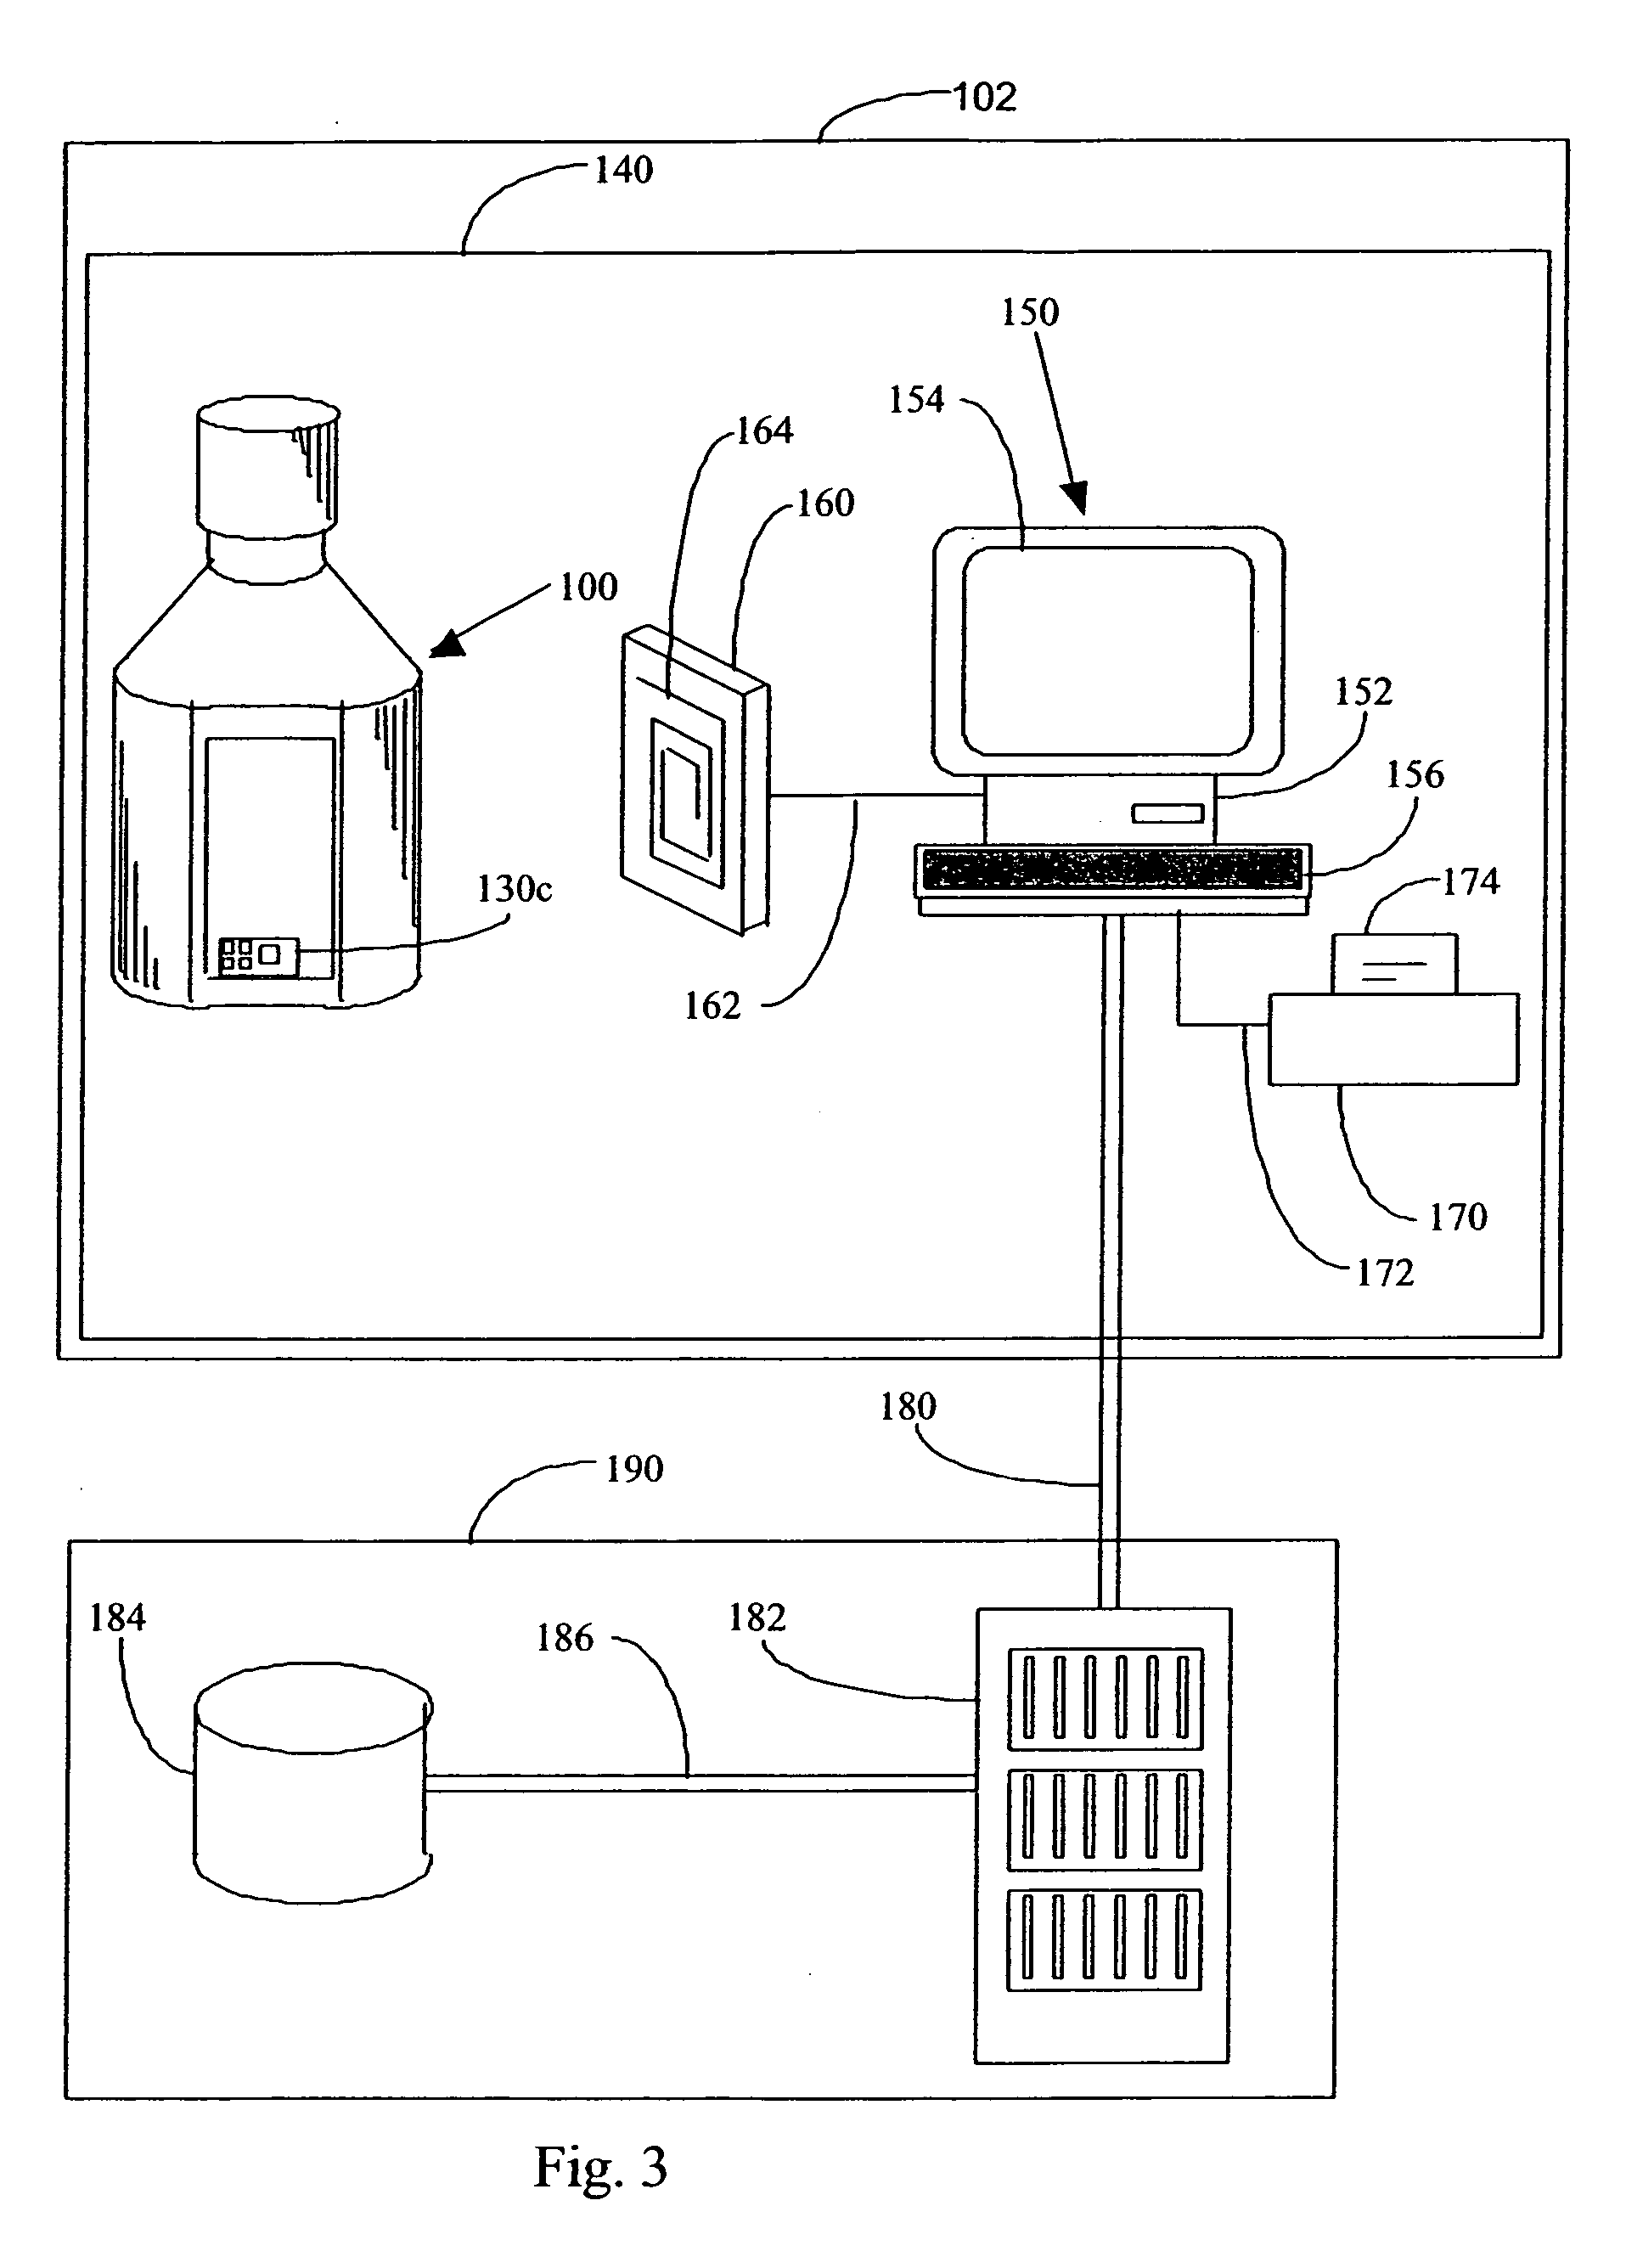 Method and system for tracking and verifying medication